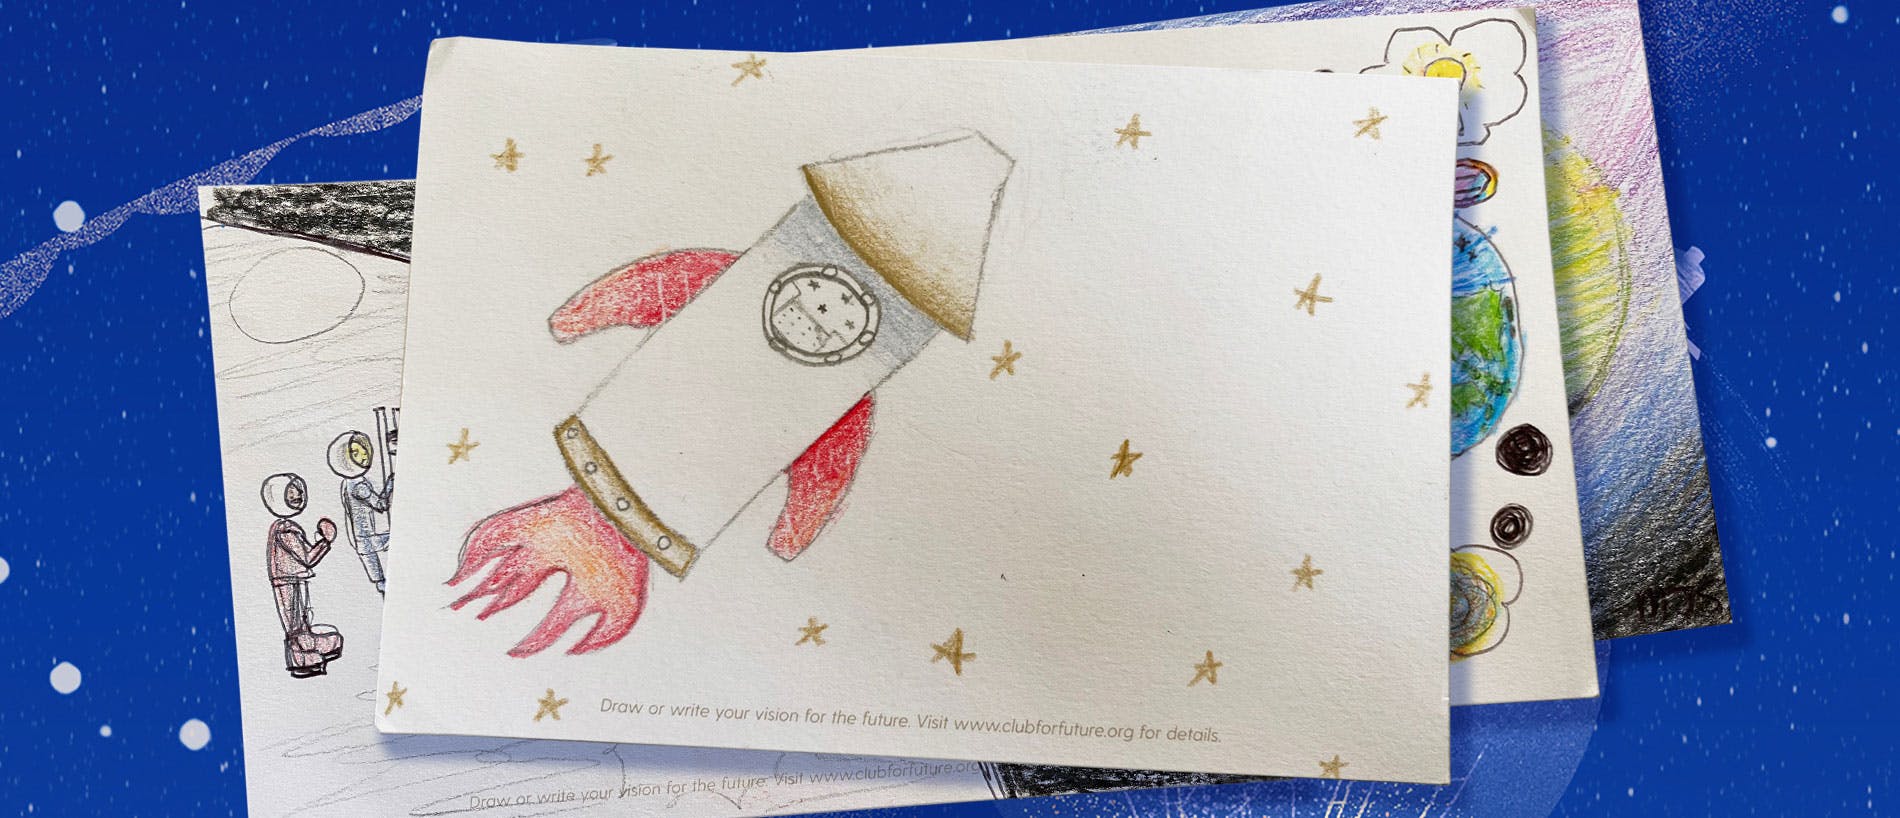 A postcard with a drawn rocket among the stars